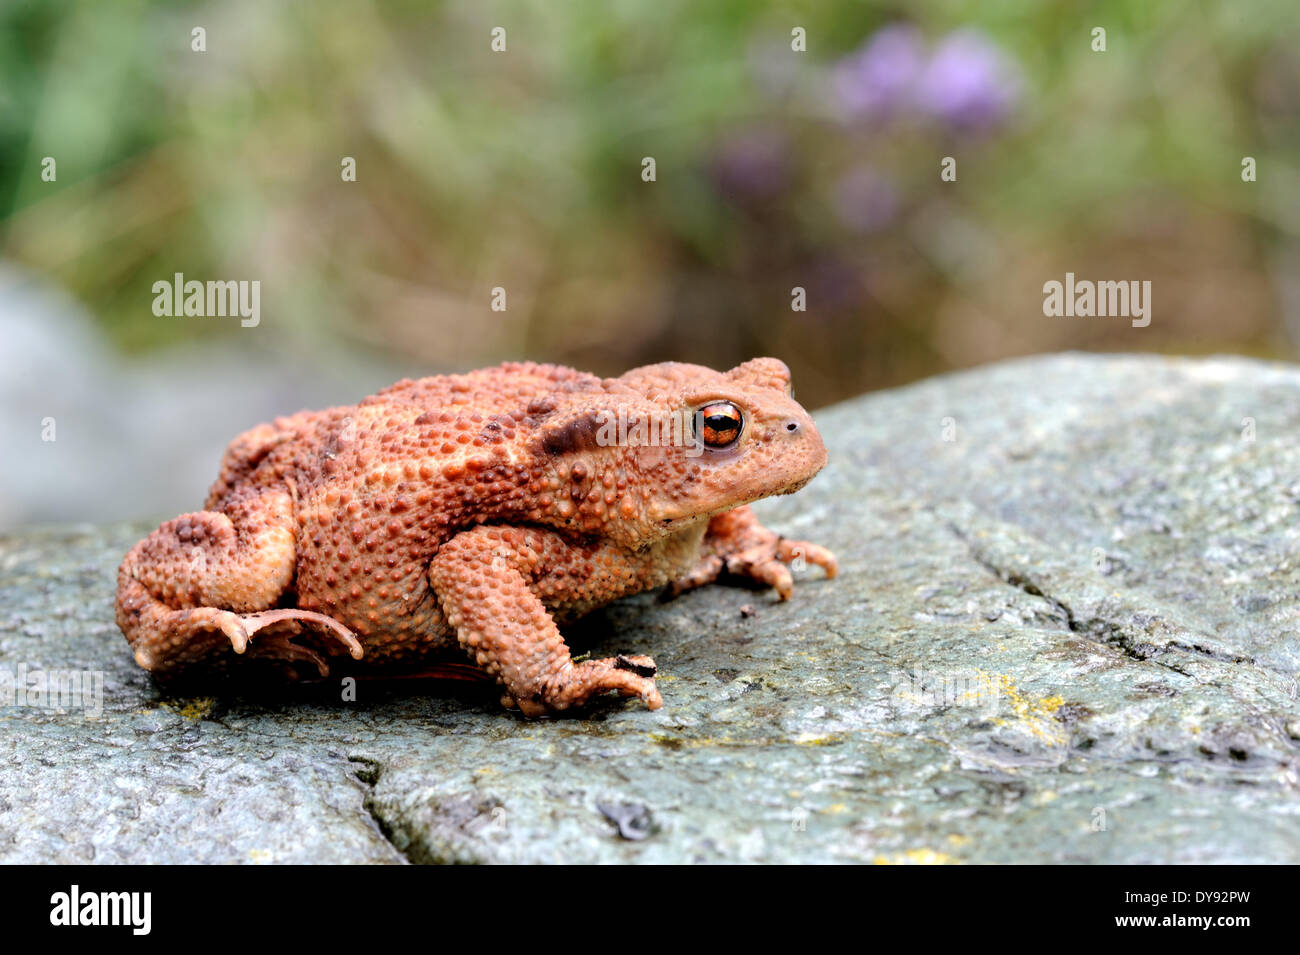 European toad, Bufo bufo, Amphibian, toad, Amphibians, toads, frogs, young, animal, animals, Germany, Europe, Stock Photo